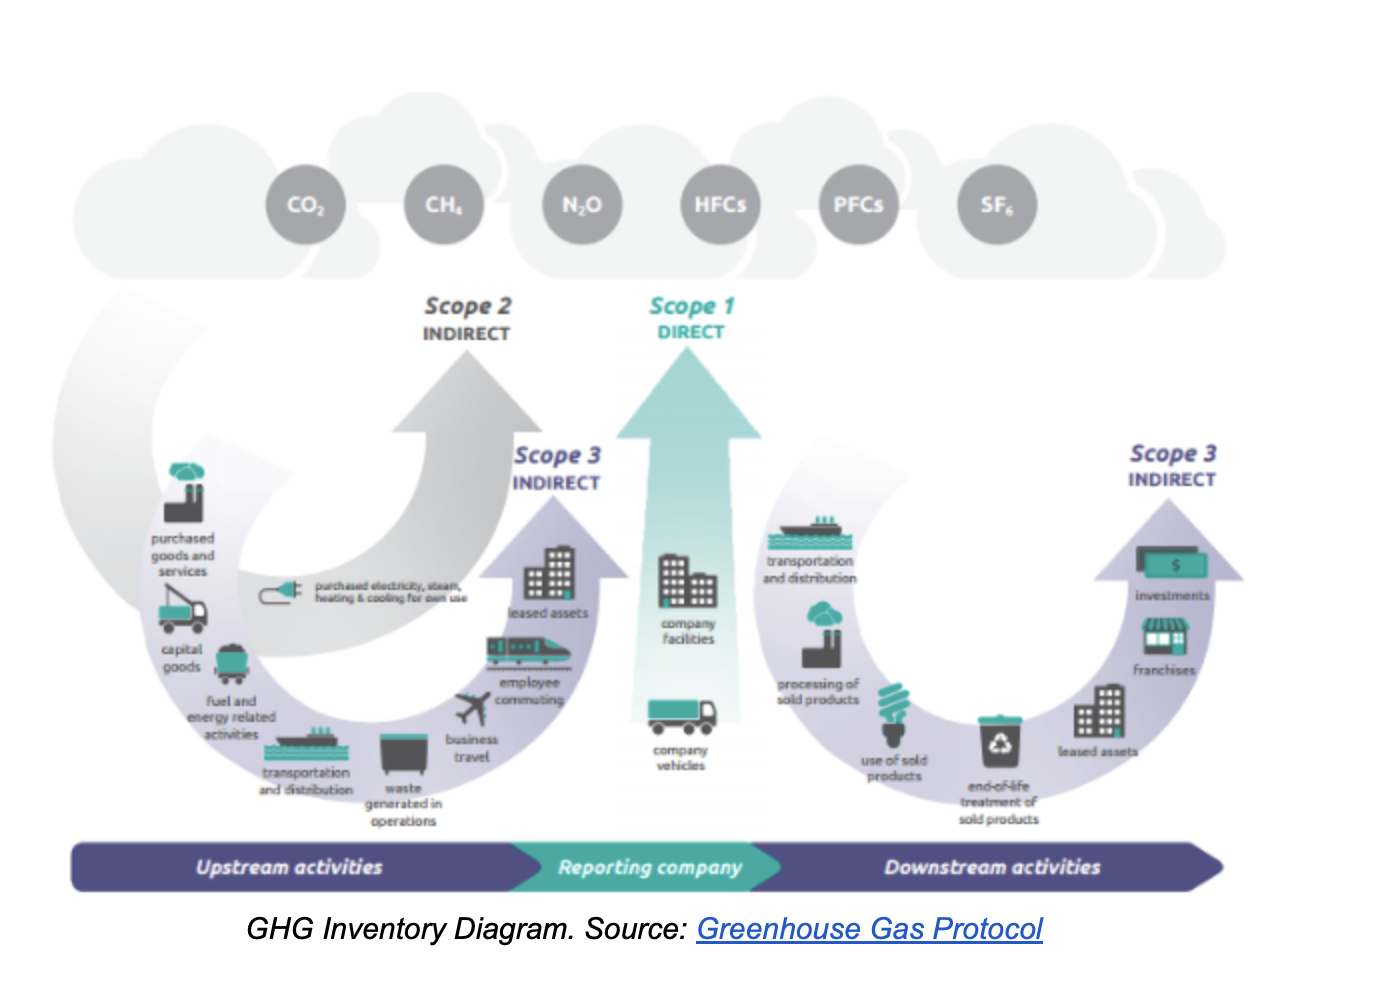 GHG Protocol basics: Scope 1, 2, and 3 emissions reporting